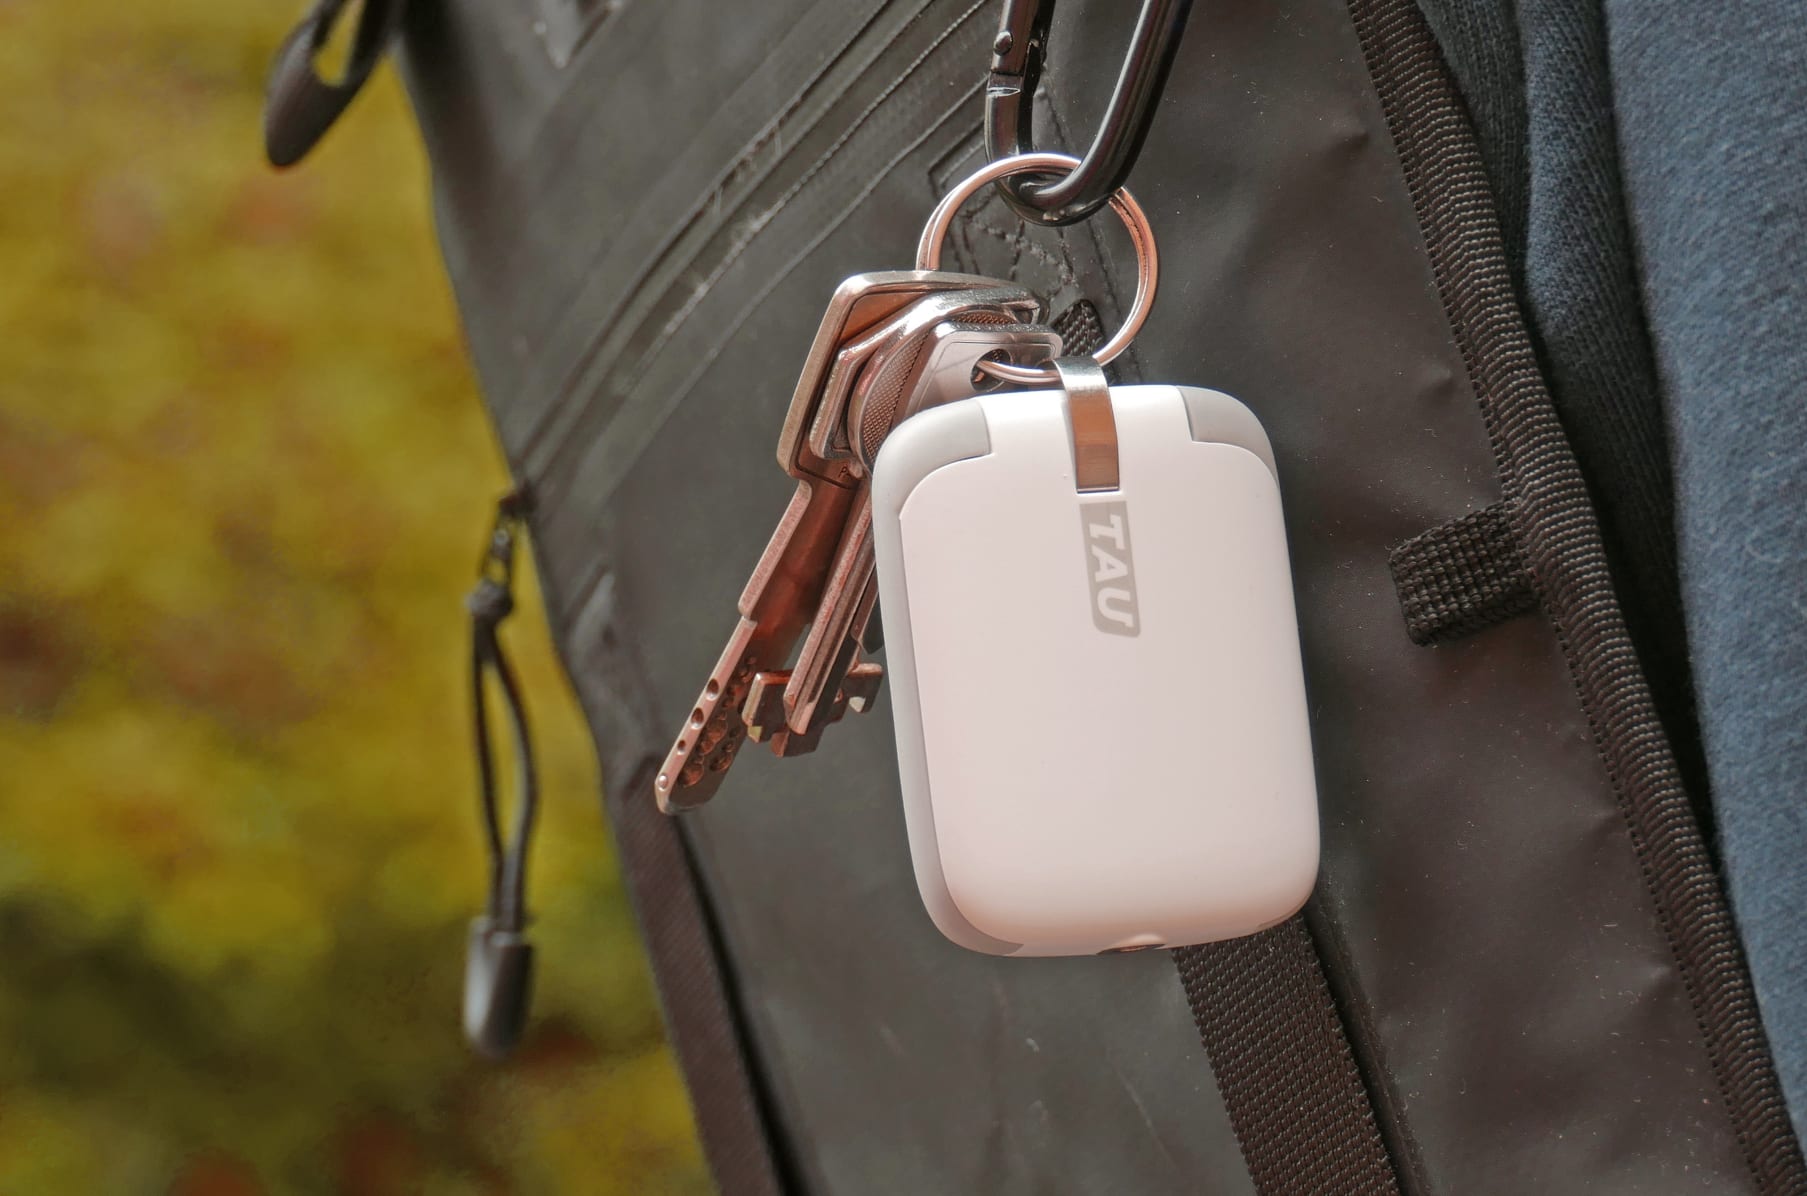 Rolling Square Tau Power Bank review - The Gadgeteer